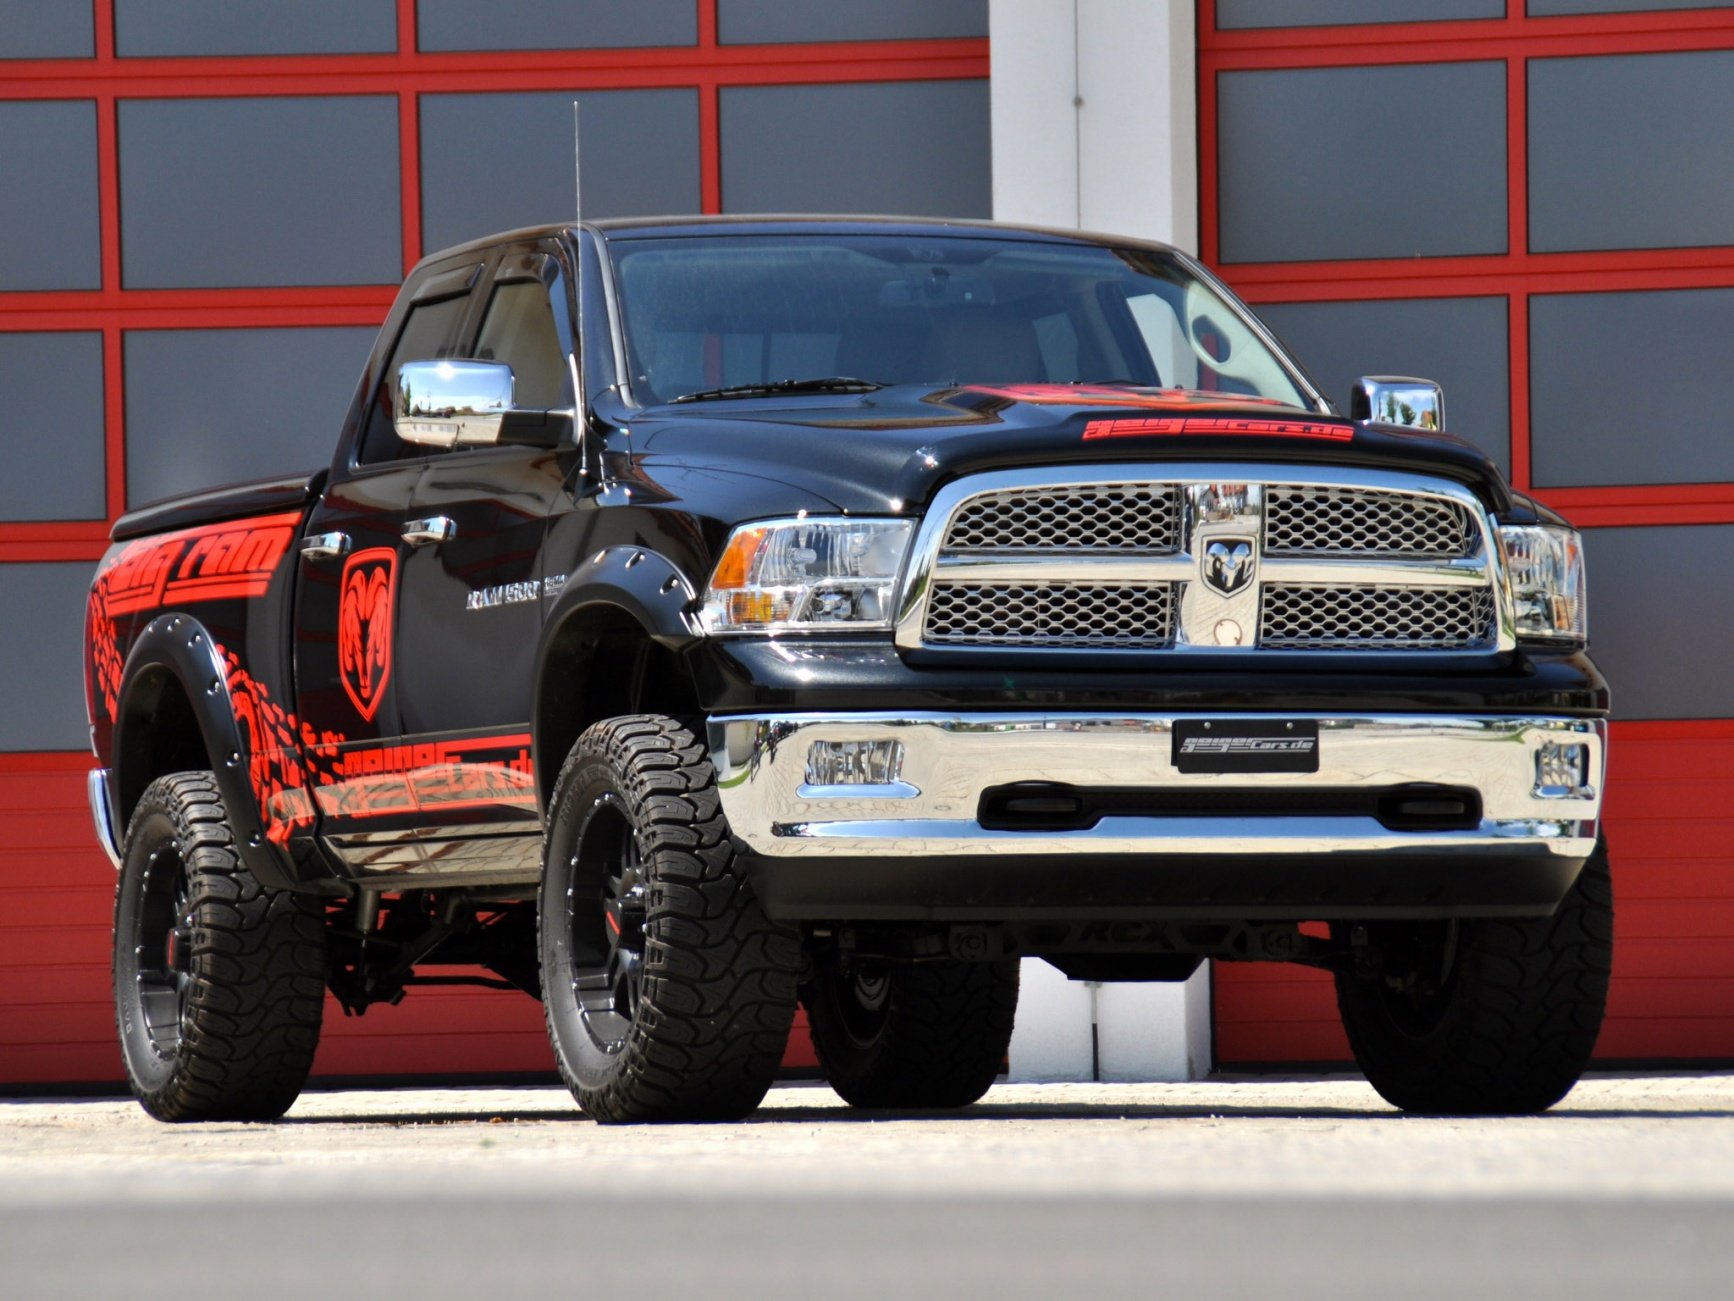 20+ Dodge Ram Rally Truck Pictures For Car Stereo Wallpaper HD download